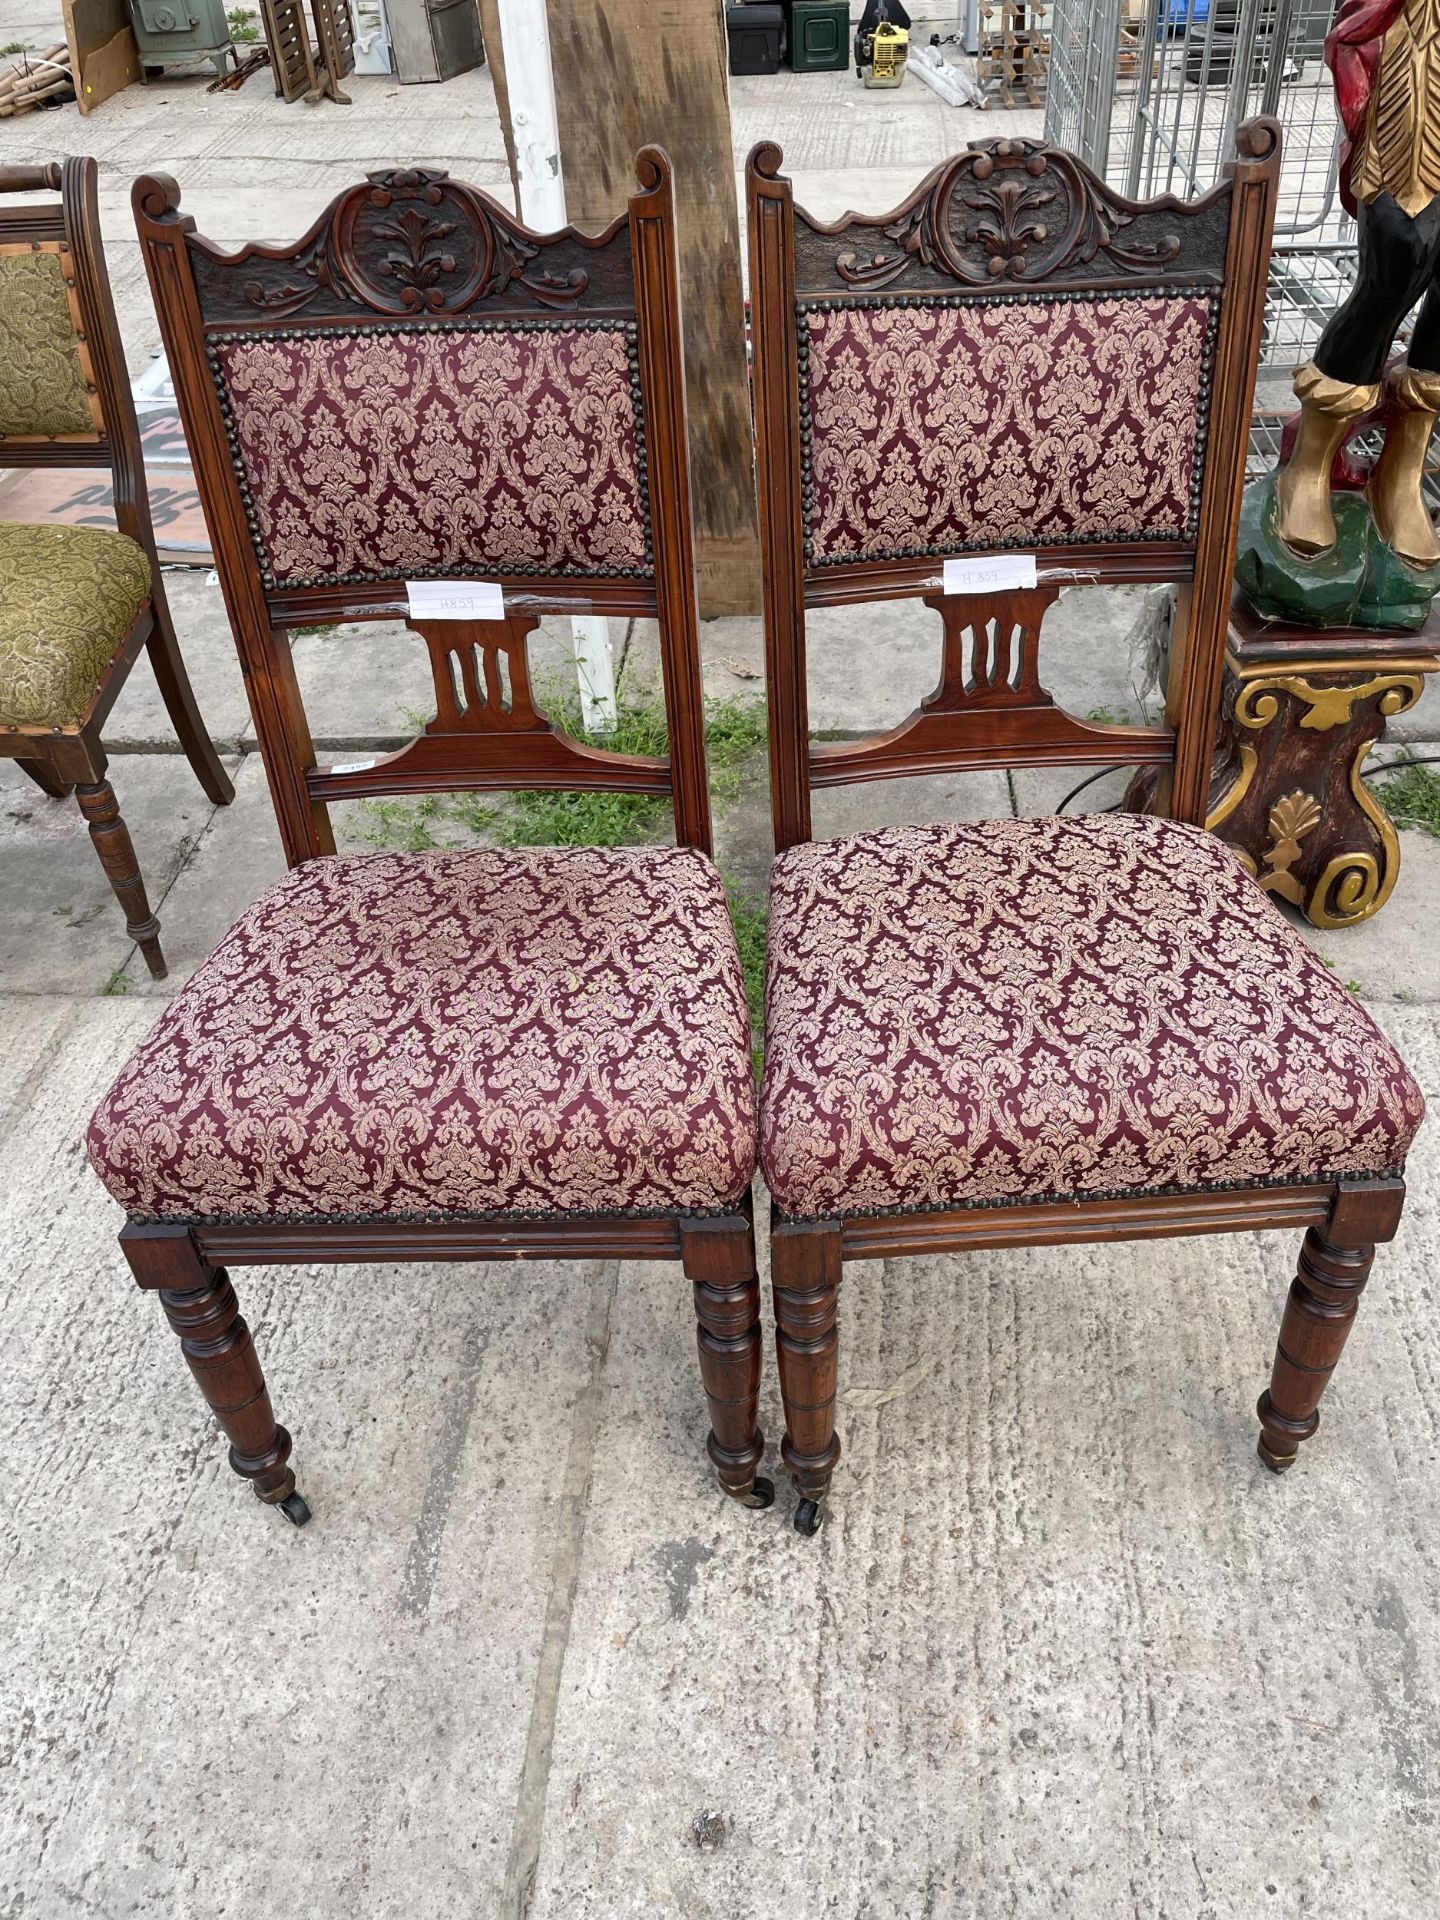 TWO EDWARDIAN DINING CHAIRS